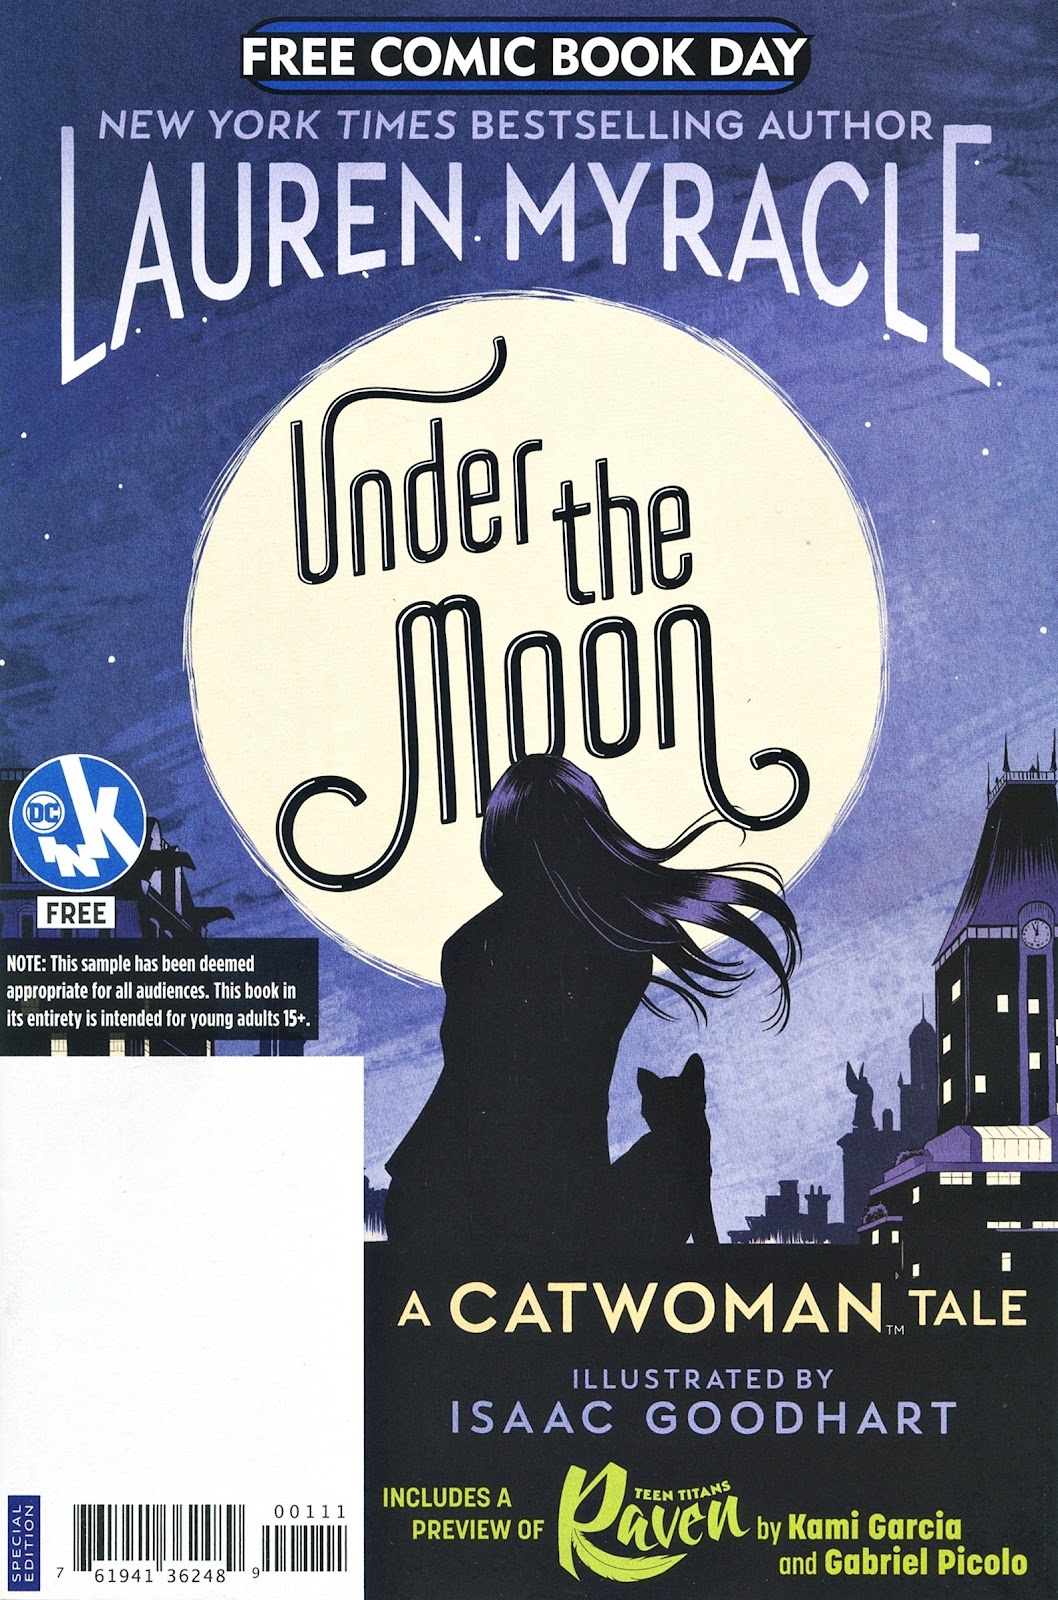 Read Online Free Comic Book Day 19 Comic Issue Under The Moon A Catwoman Tale